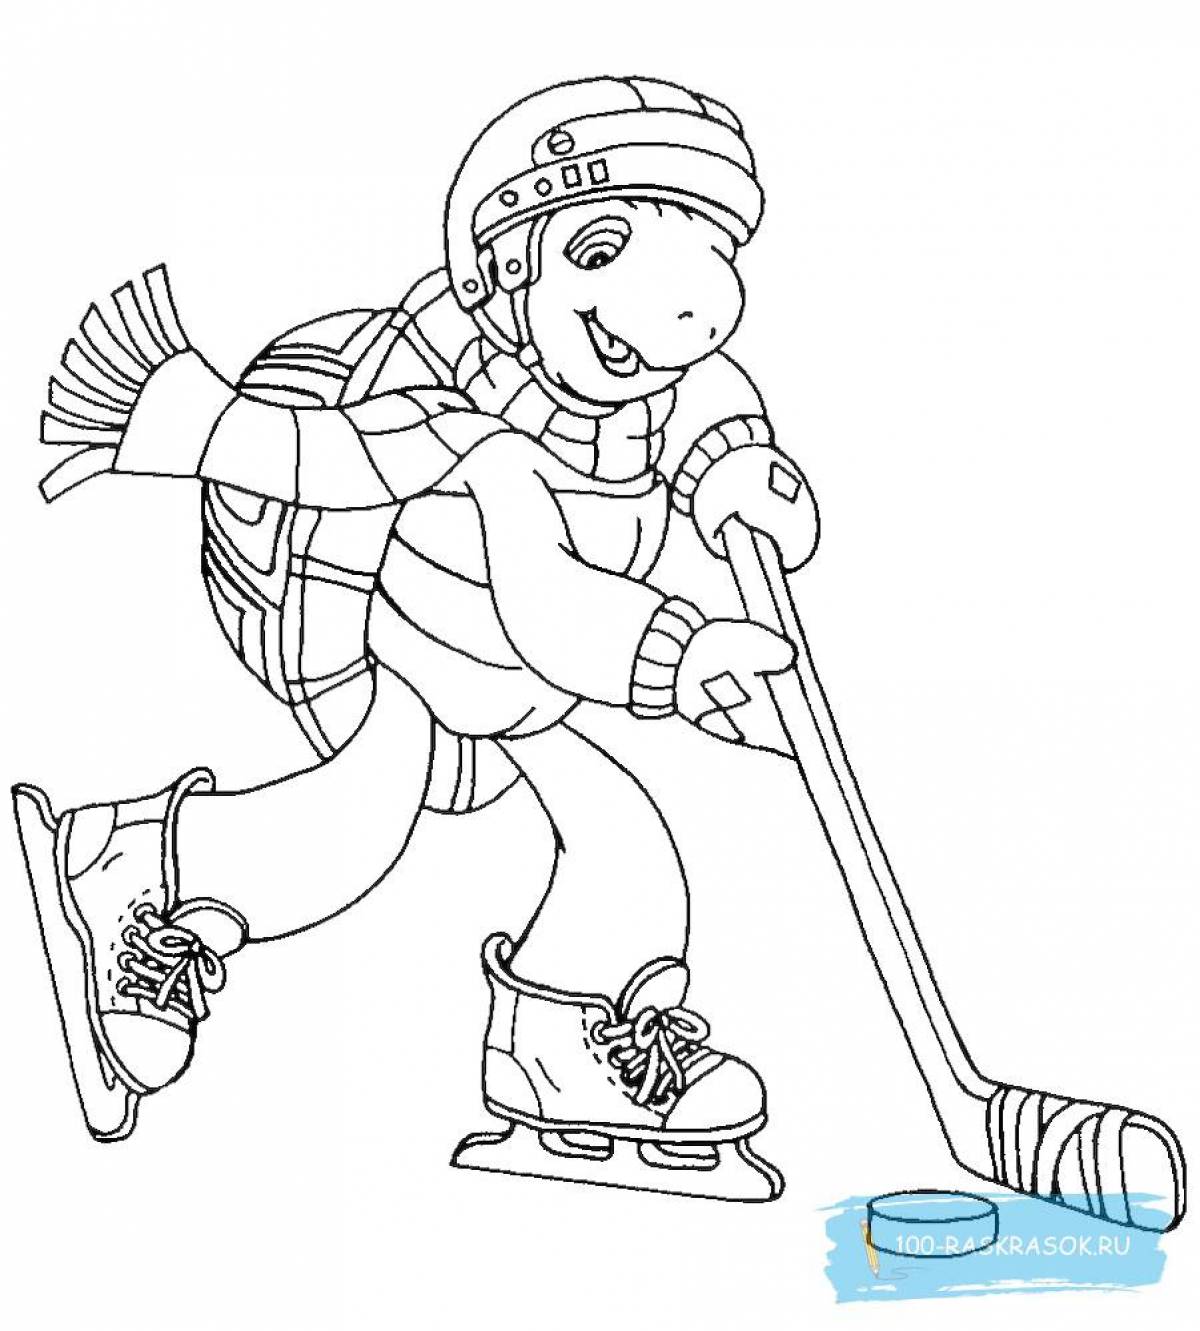 Glorious winter sports coloring page for 6-7 year olds